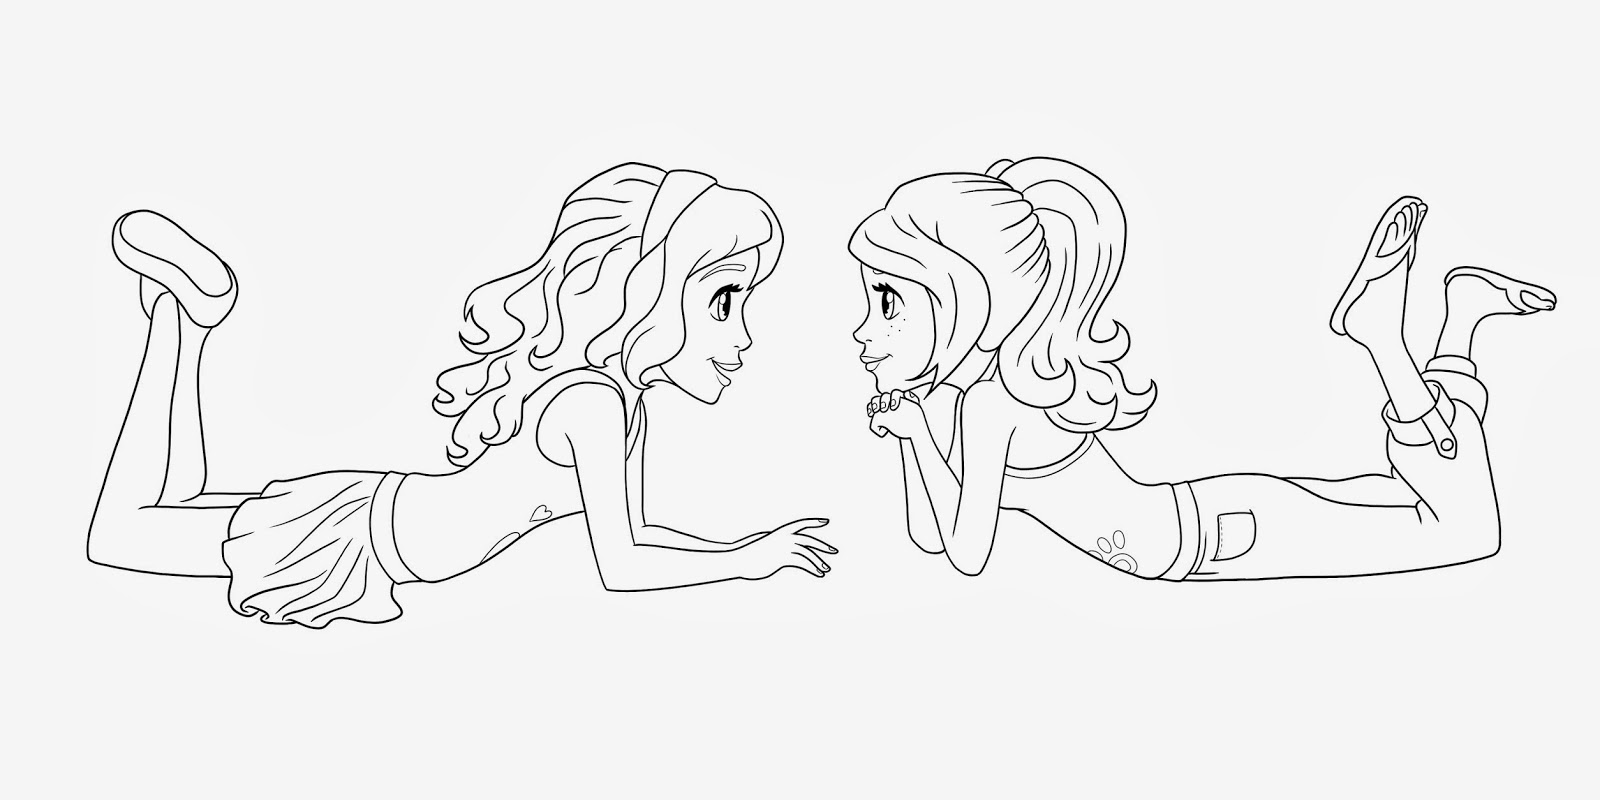 Lego Friends All Coloring Page For Kids Printable Free Lego Inside